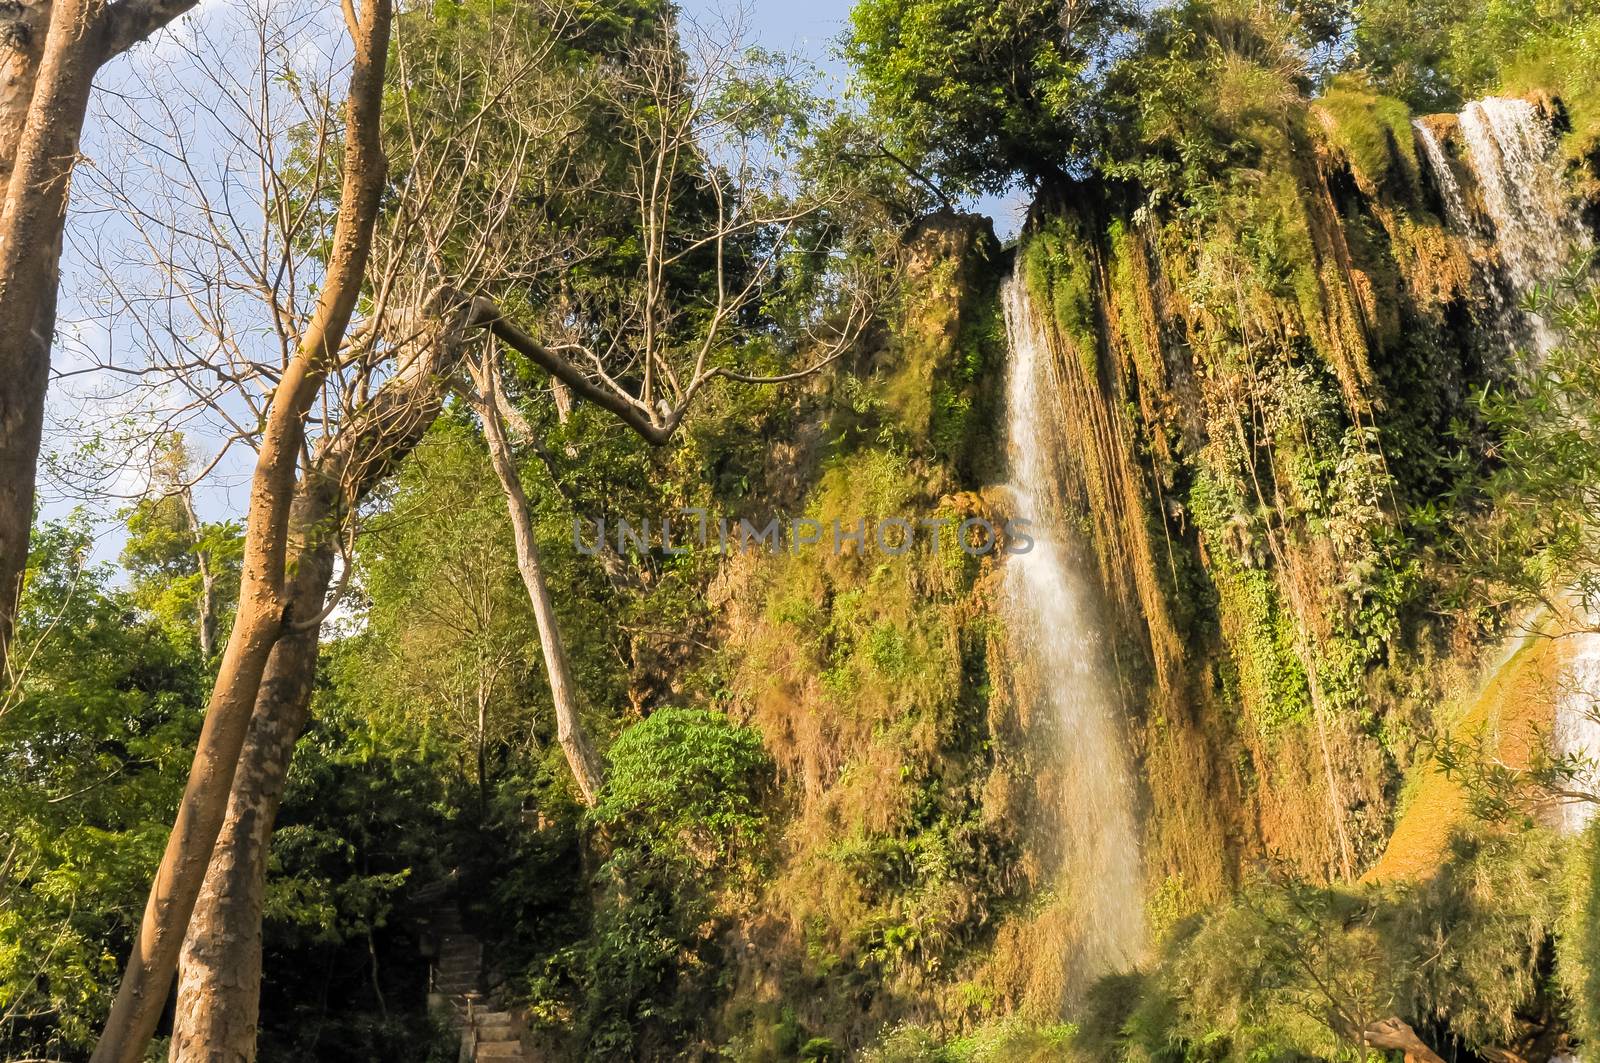 Grand mountain landscape of tree lush greenery and white curtain flowing in Dai Yem (Pink Blouse) waterfall, Moc Chau, Son La, Vietnam. Primeval scene of the early days of life on earth